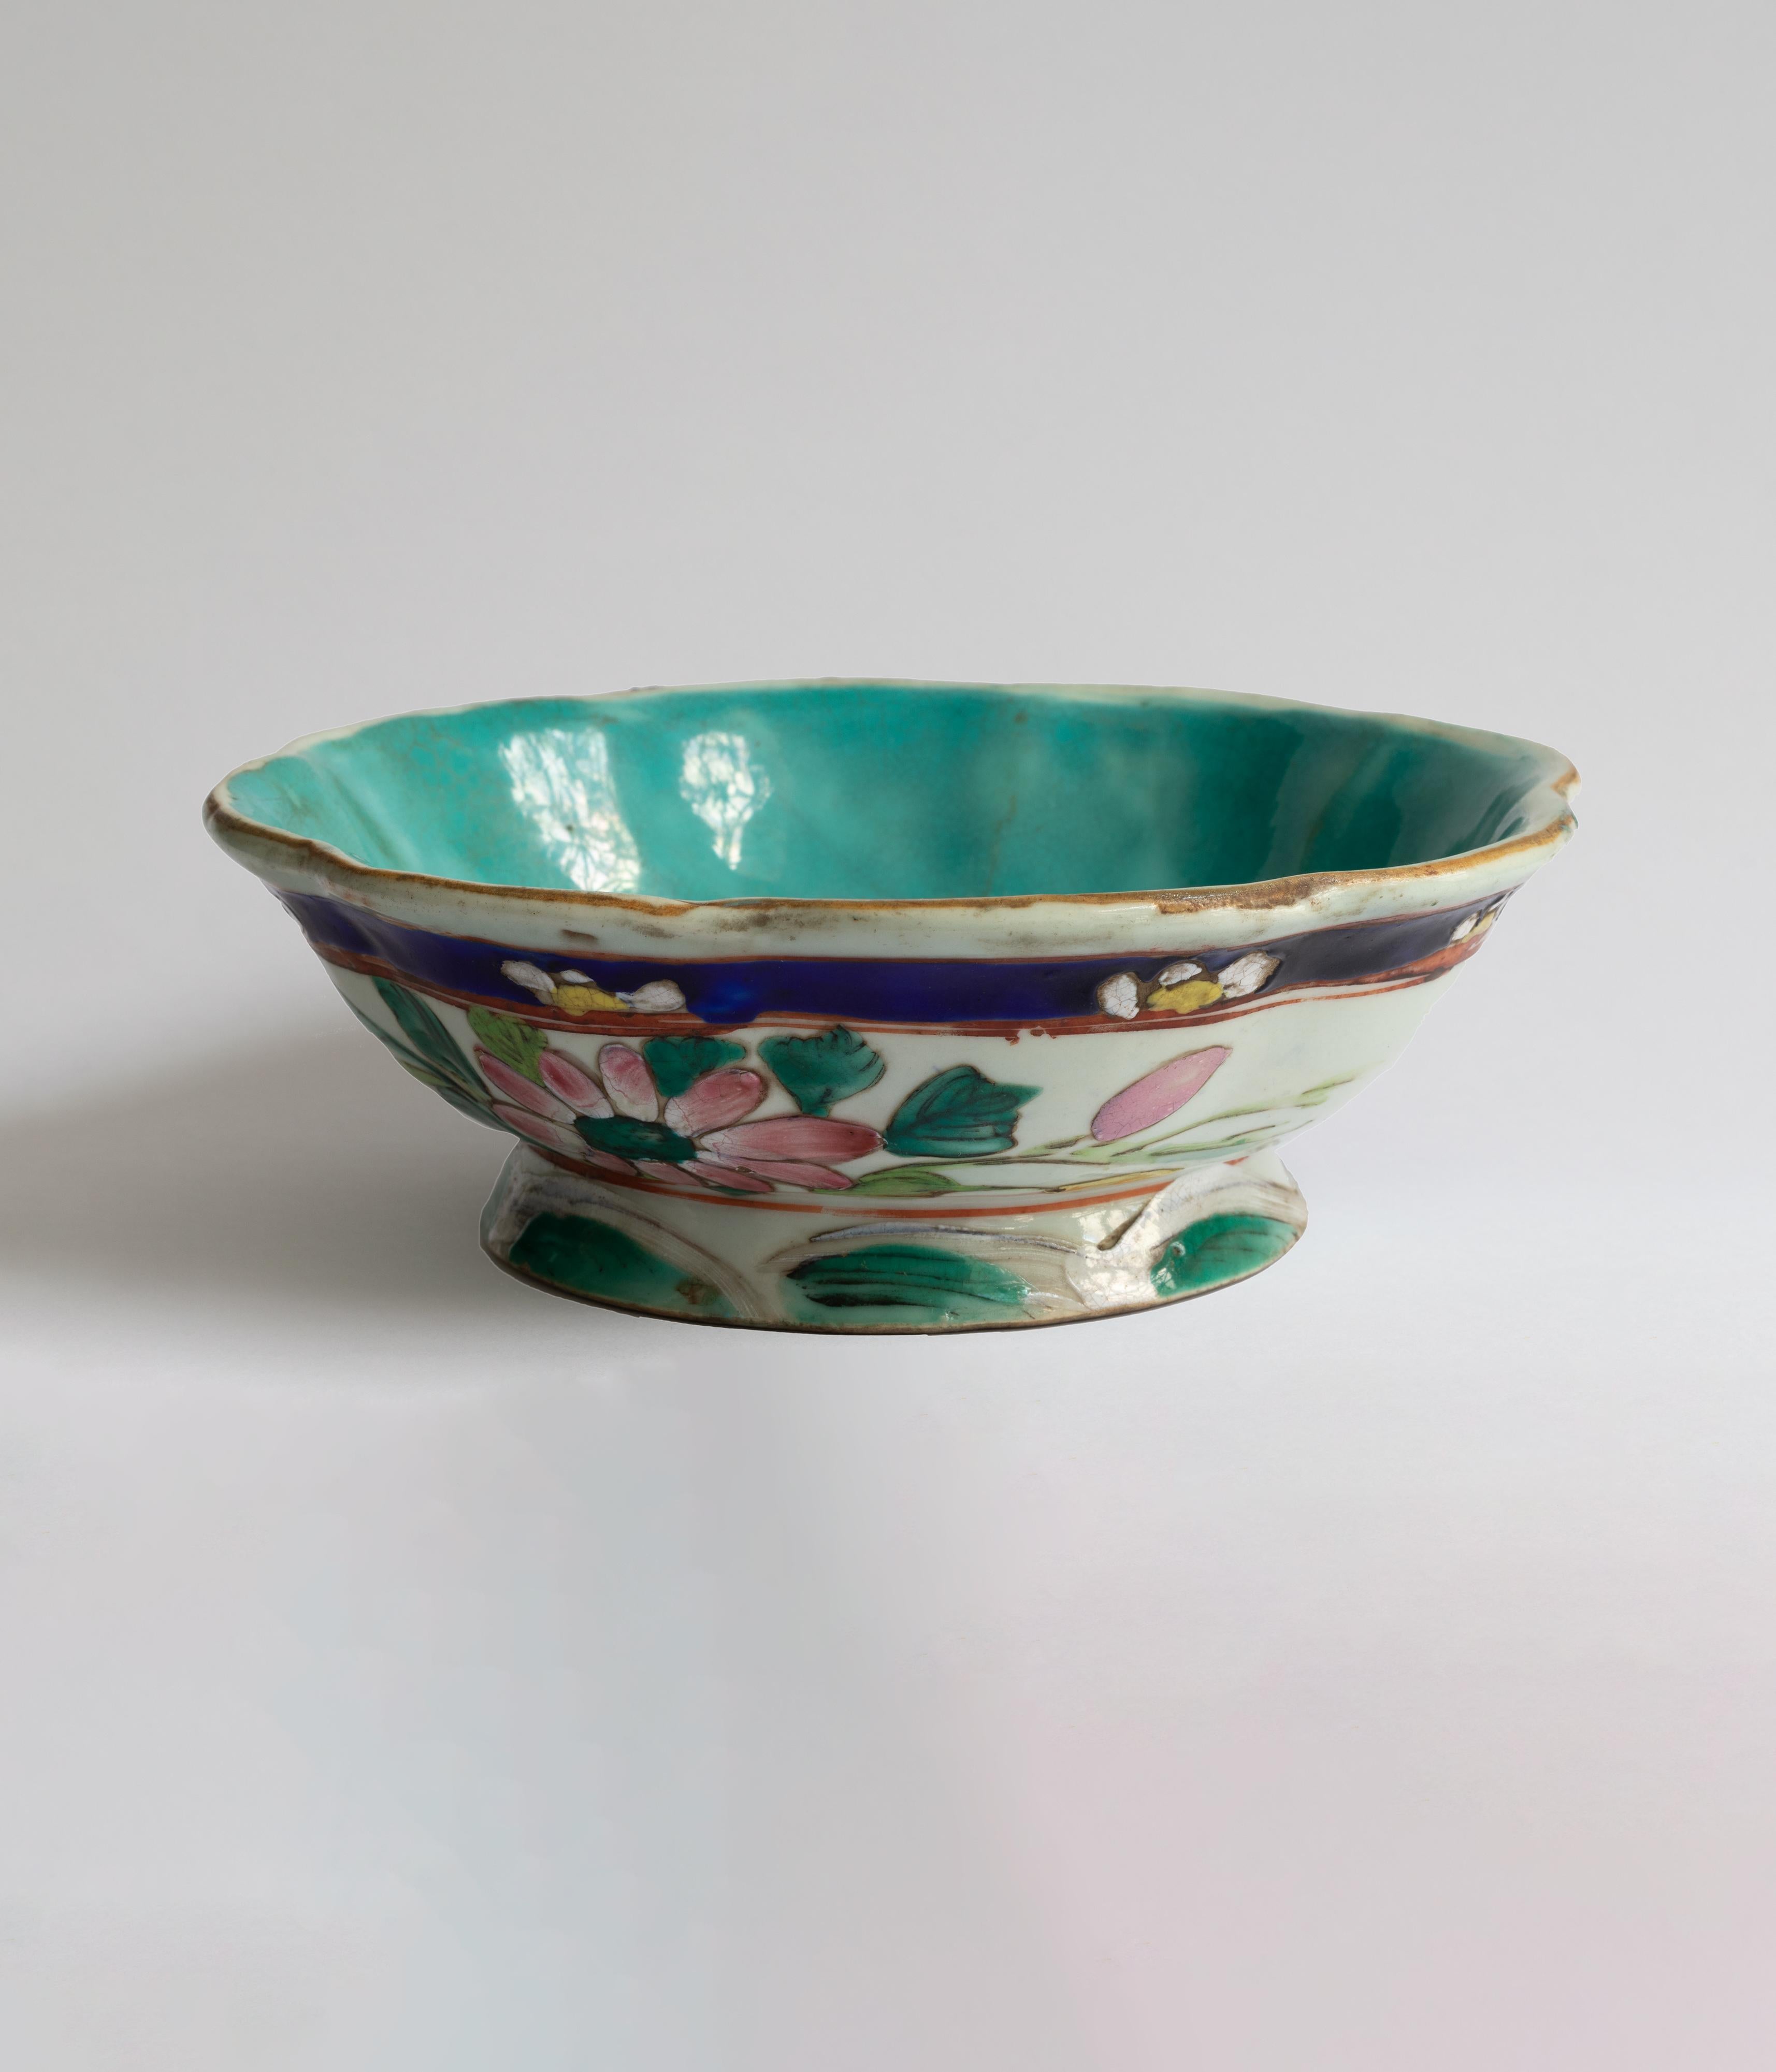 A chinese Tongzhi floral offering bowl from the 19th Century. This porcelain bowl was utilized as a serving vessel for ceremonial tributes, positioned in front of an altar. It is crafted in the shape of an eight-petal flower and exhibits scalloped